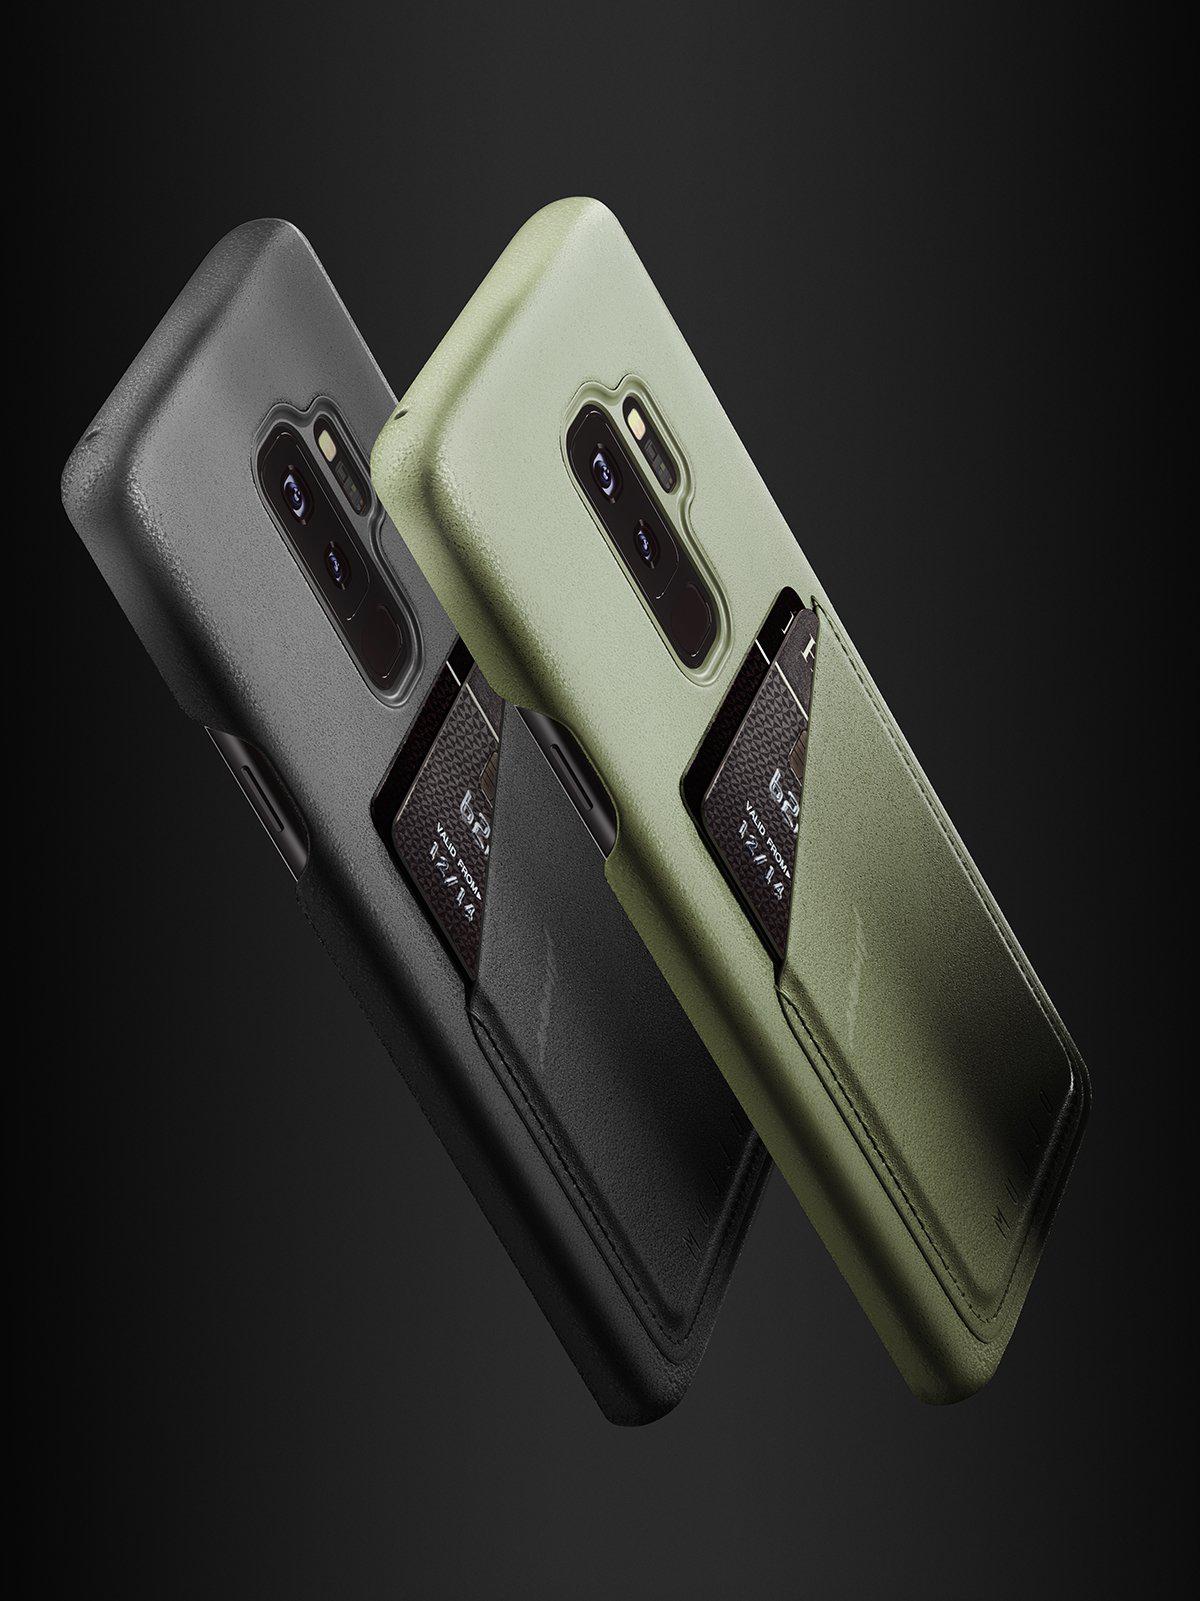 Mujjo Full Leather Wallet Case for Galaxy S9 Plus Olive - MORE by Morello Indonesia